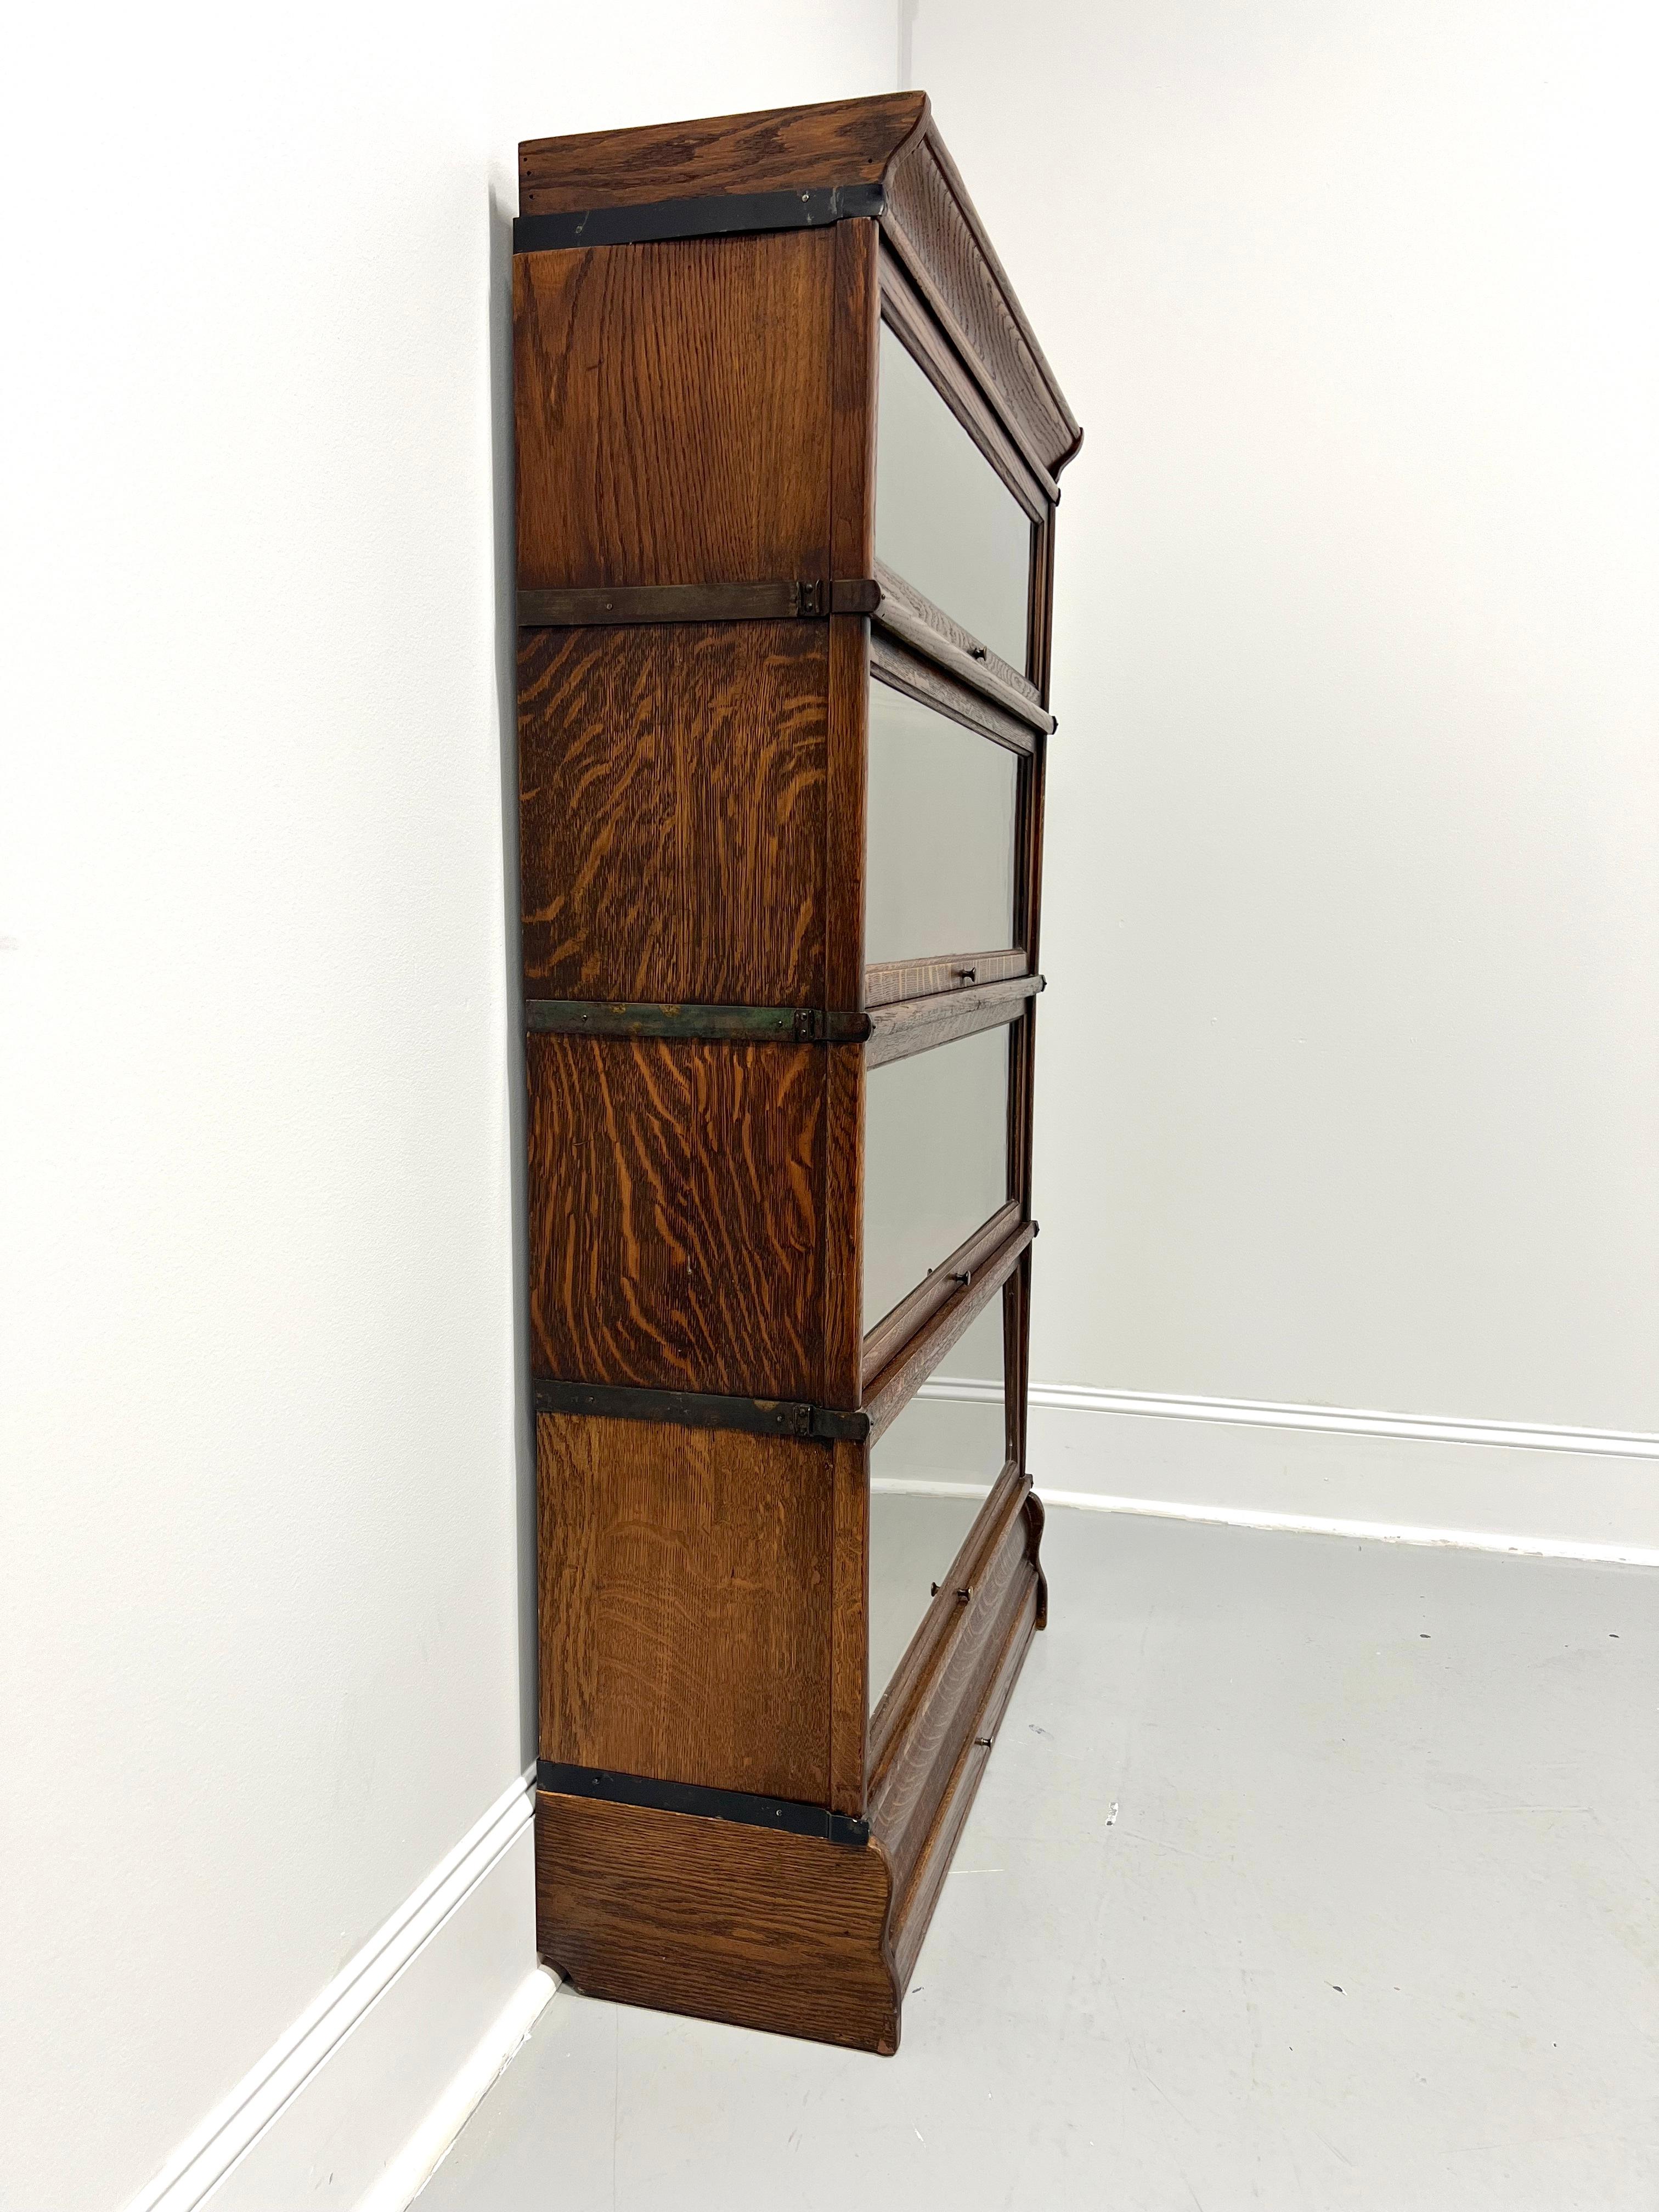 An antique Arts & Crafts style stacking barrister bookcase by Globe Wernicke, of Cincinnati, Ohio, USA. Quartersawn tiger oak with brass knobs and brass side accents/supports. Features crown, four various size stacking flip-up slide-back glass door